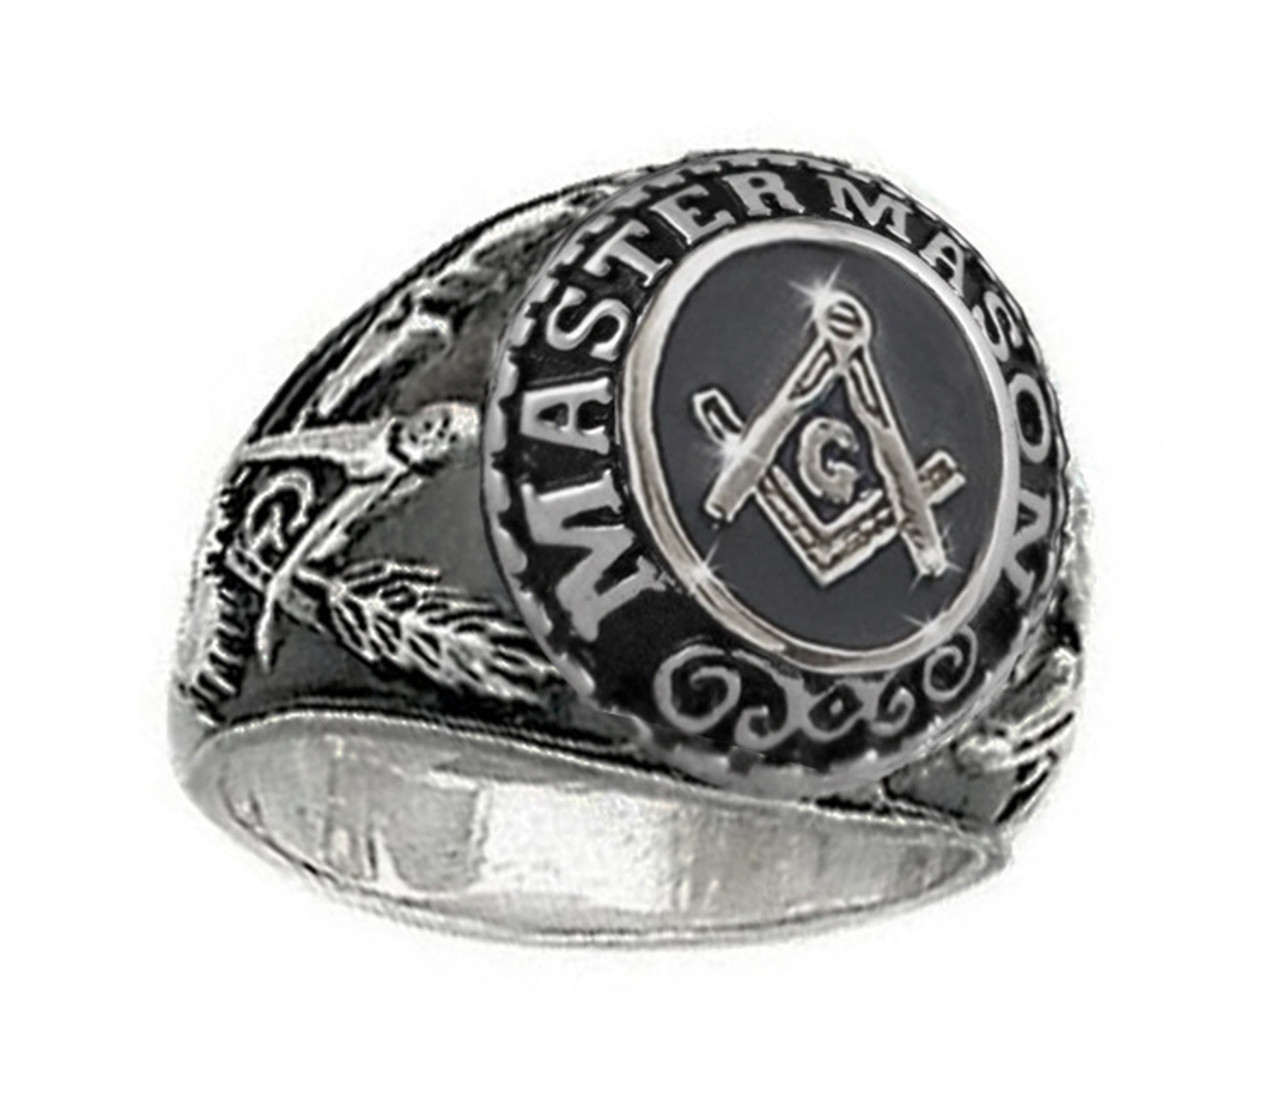 Freemason College Style Ring - with classic center Masonic design etched symbol (Silver Color Stainless Steel) Mason Ring / Masonic Rings